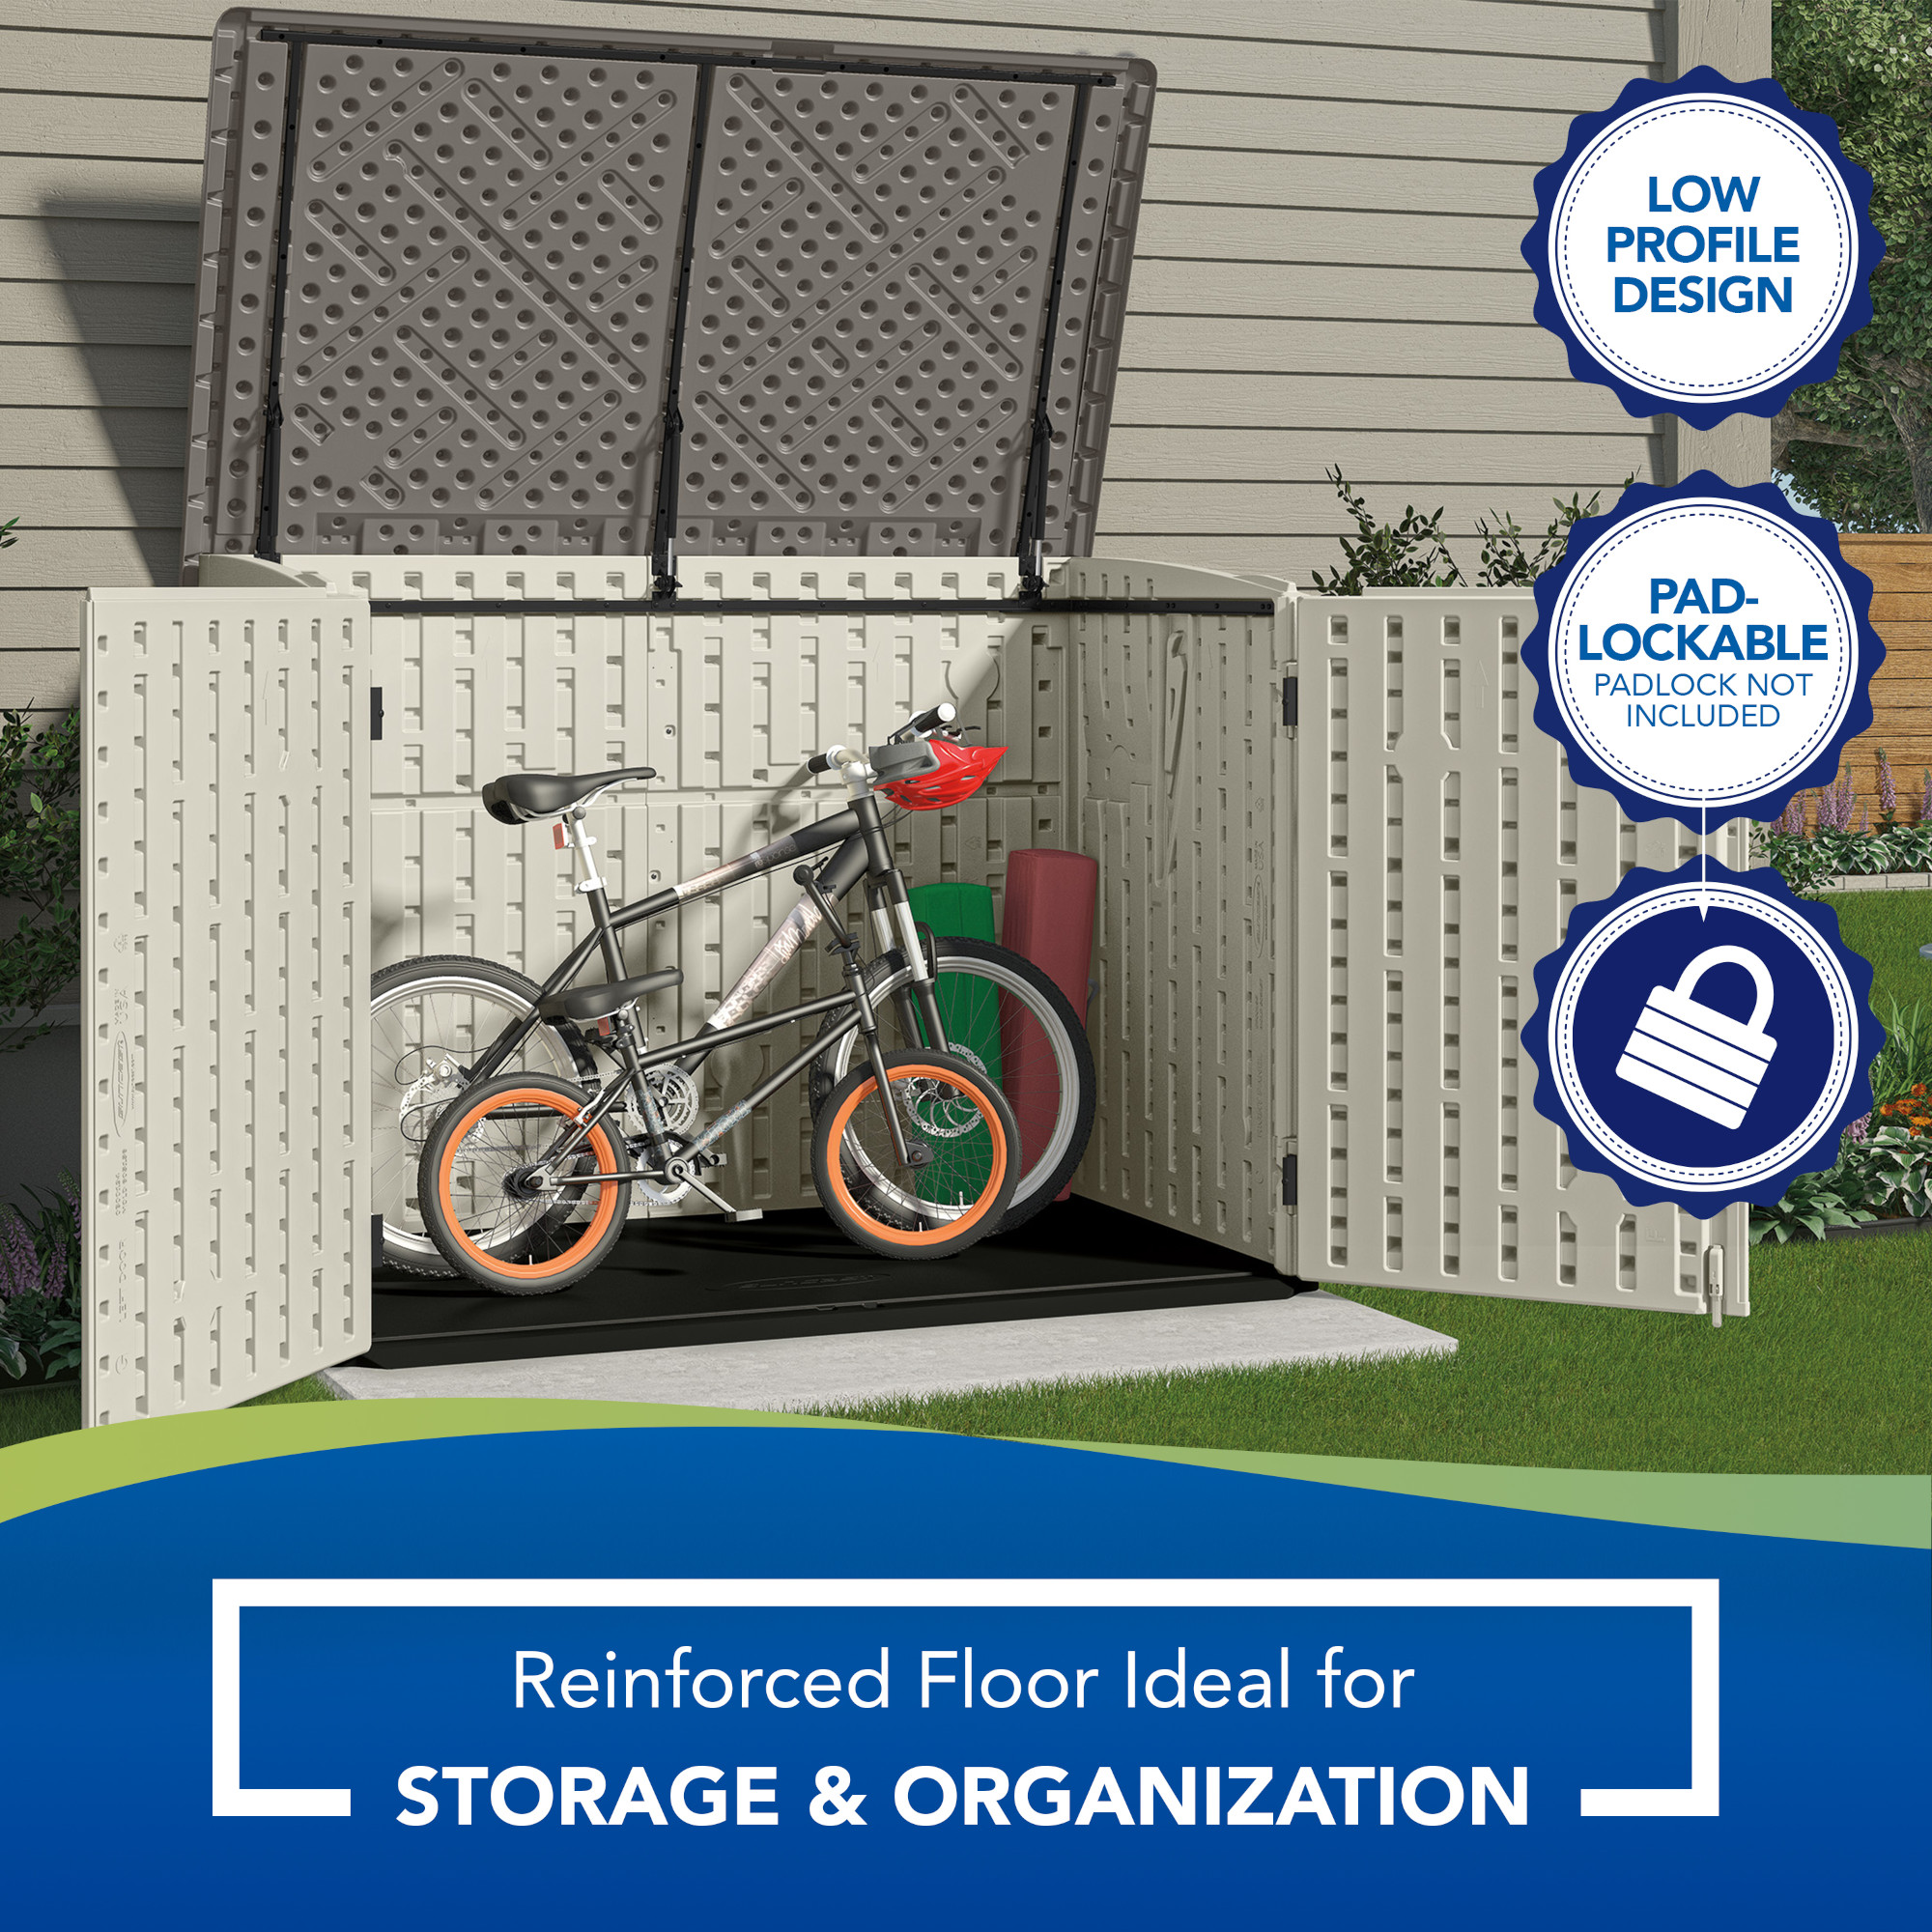 Suncast Plastic Storage Shed, Off-White and Gray, 44.25 in D x 52 in H x 70.5 in W - image 4 of 7